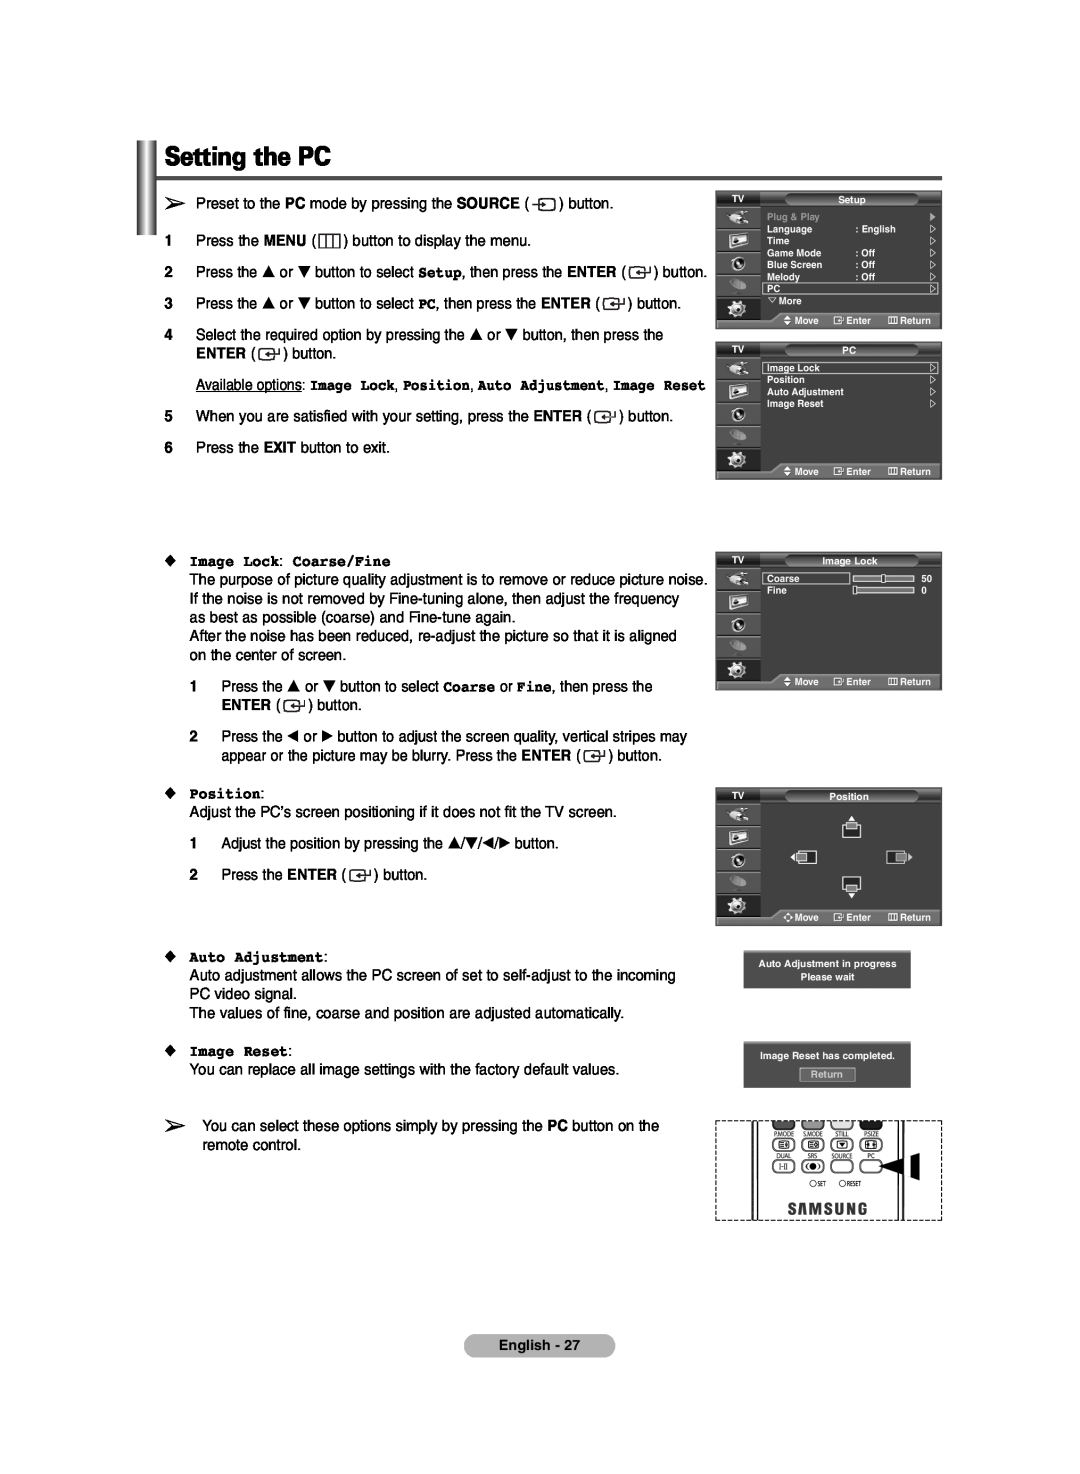 Samsung PDP-TELEVISION manual Setting the PC, Image Lock Coarse/Fine, Auto Adjustment, Image Reset, Position 